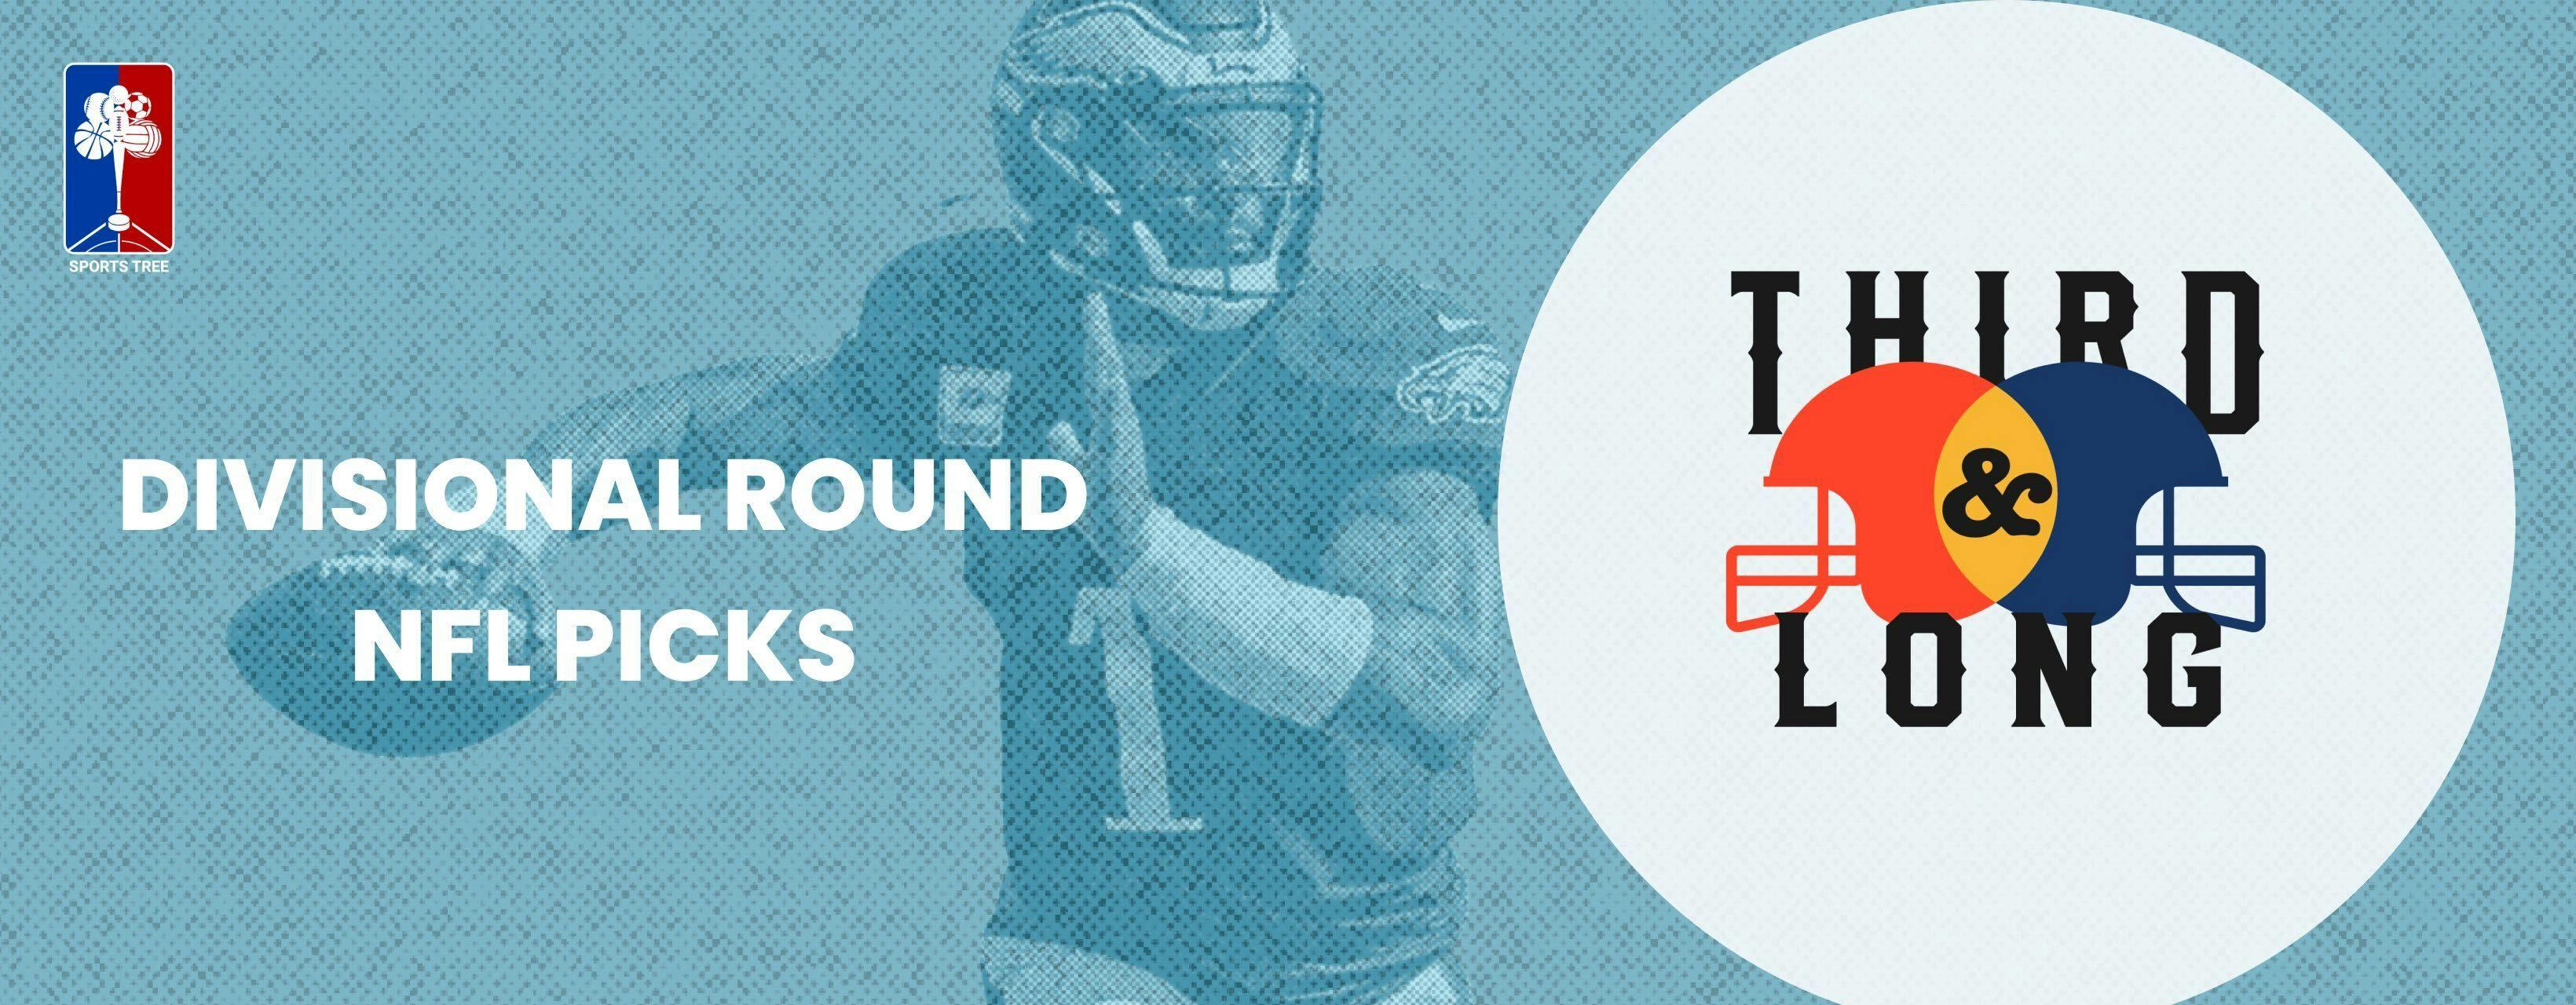 Sports Tree Pick NFL Divisional Weekend Preview, Picks and Best Bets